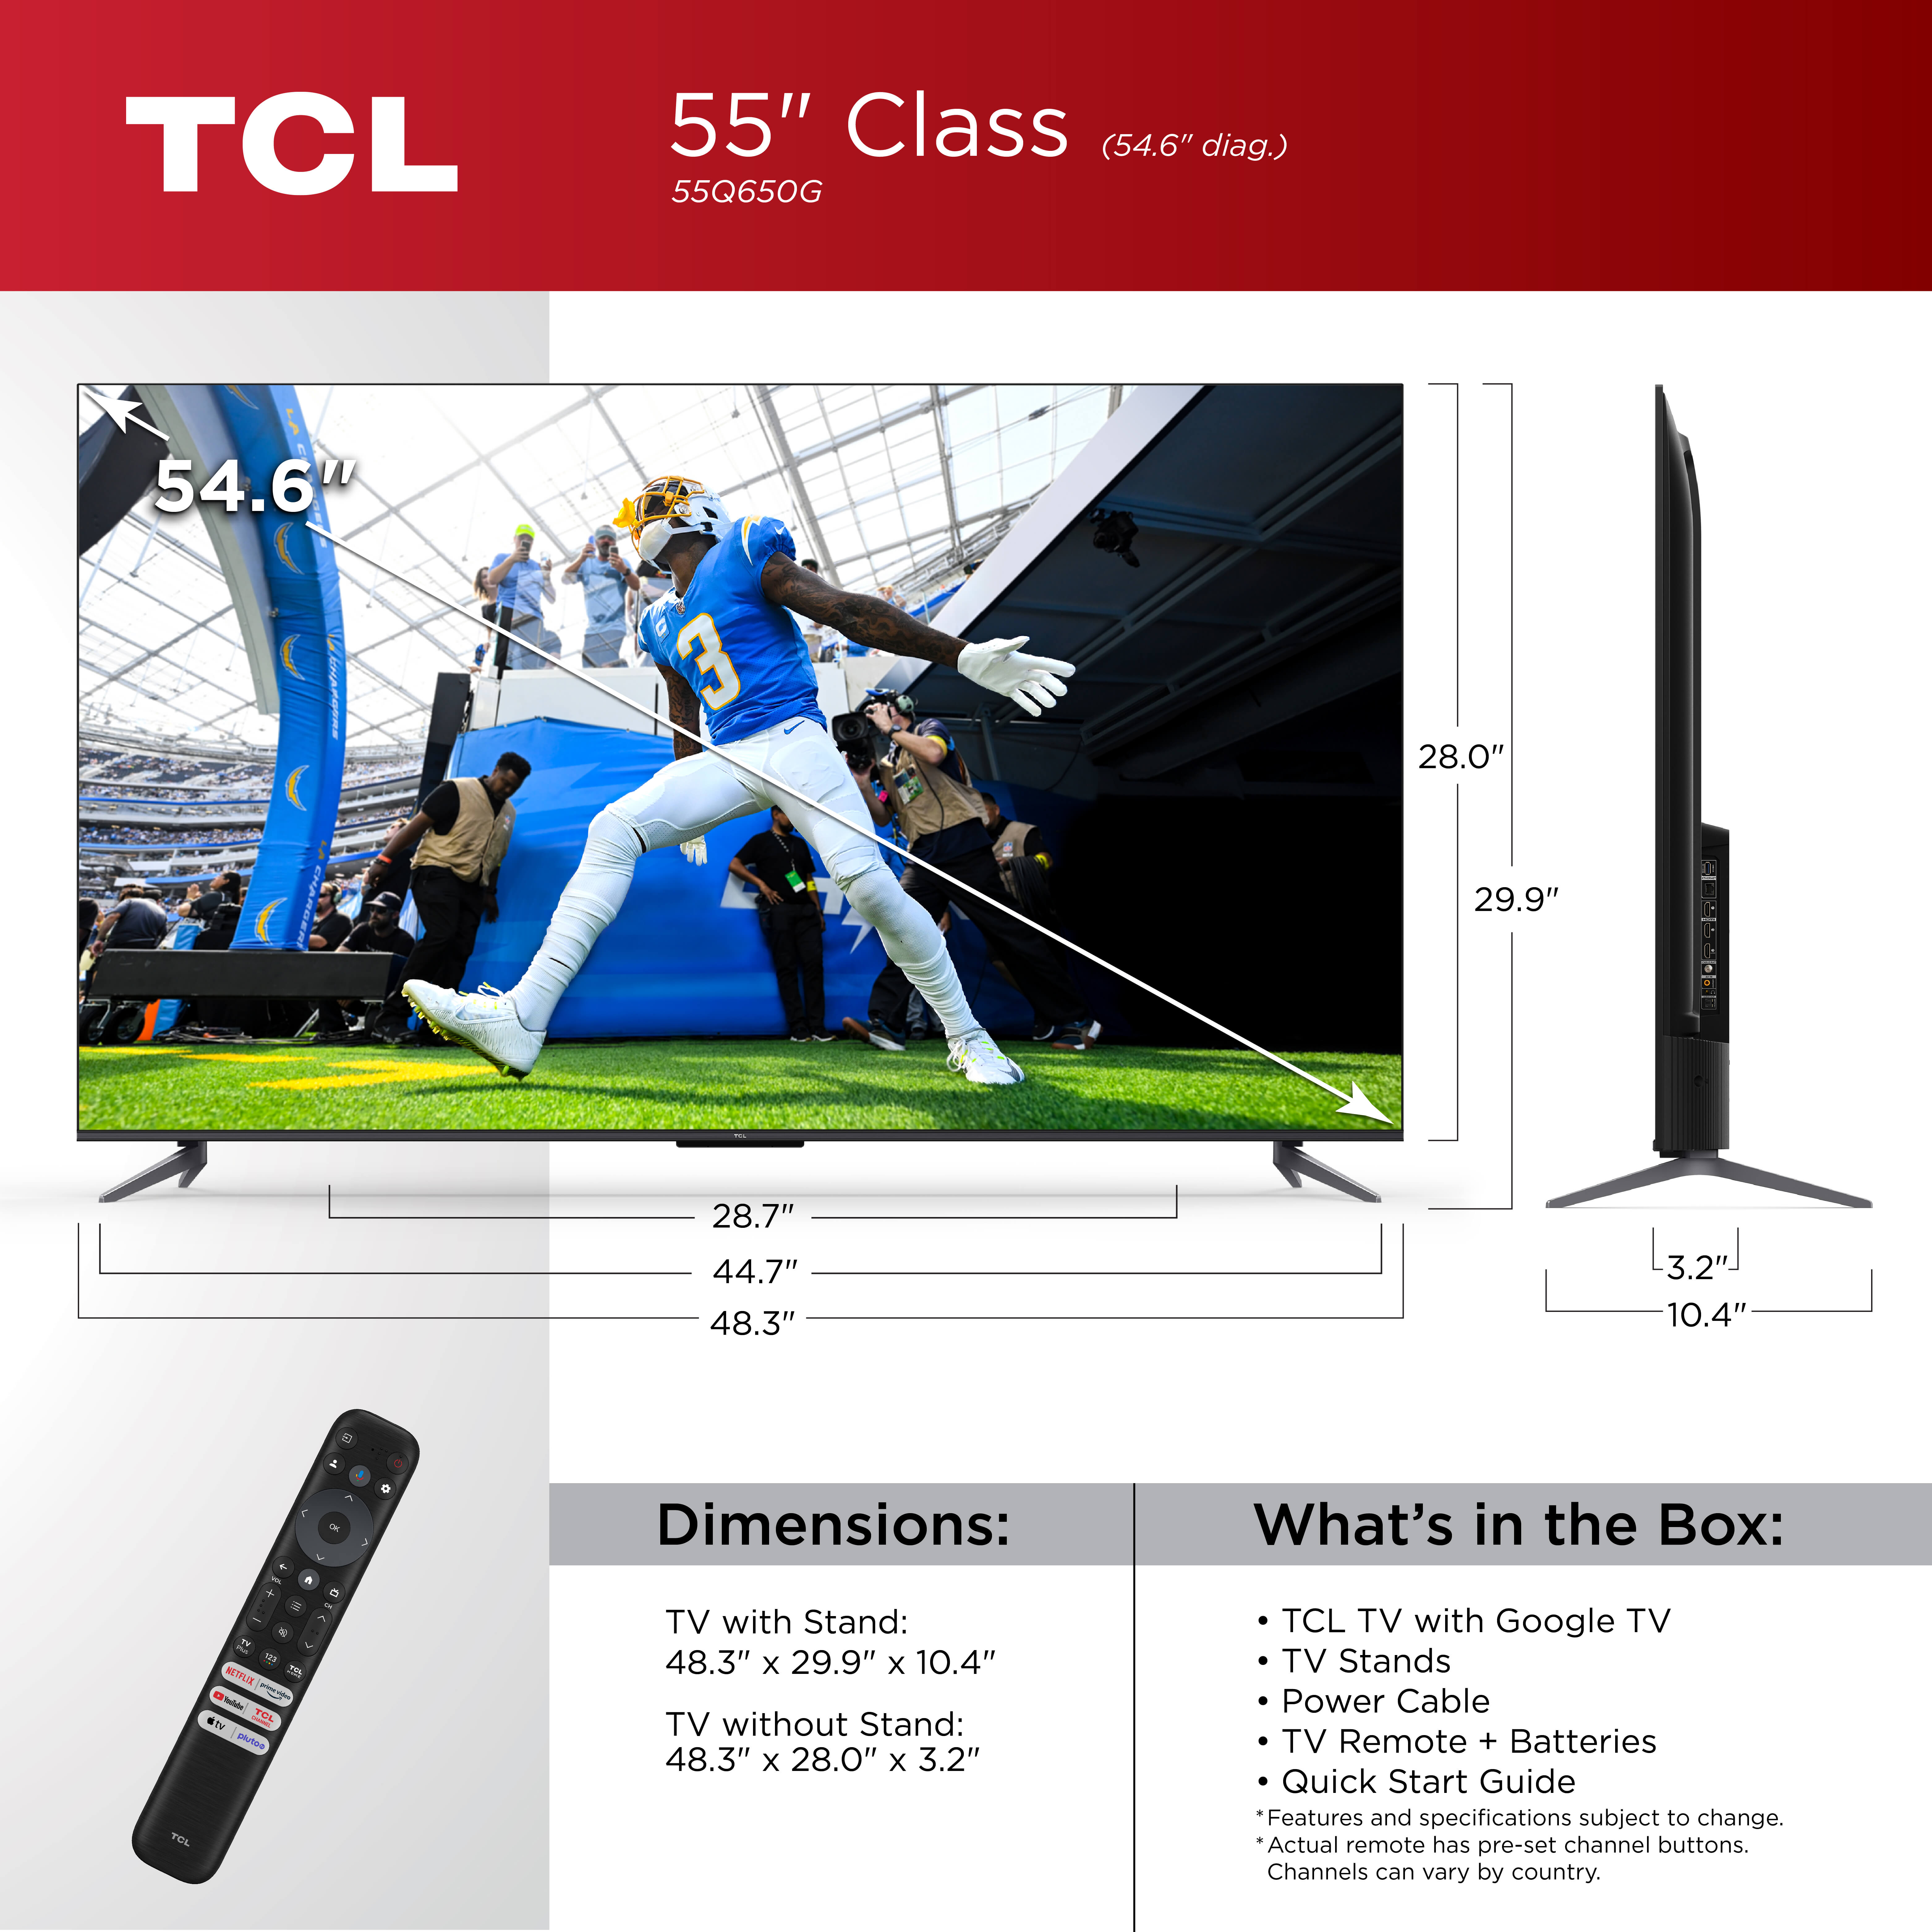 TCL 55” Class Q Class 4K QLED HDR Smart TV with Google TV, 55Q650G - image 3 of 17